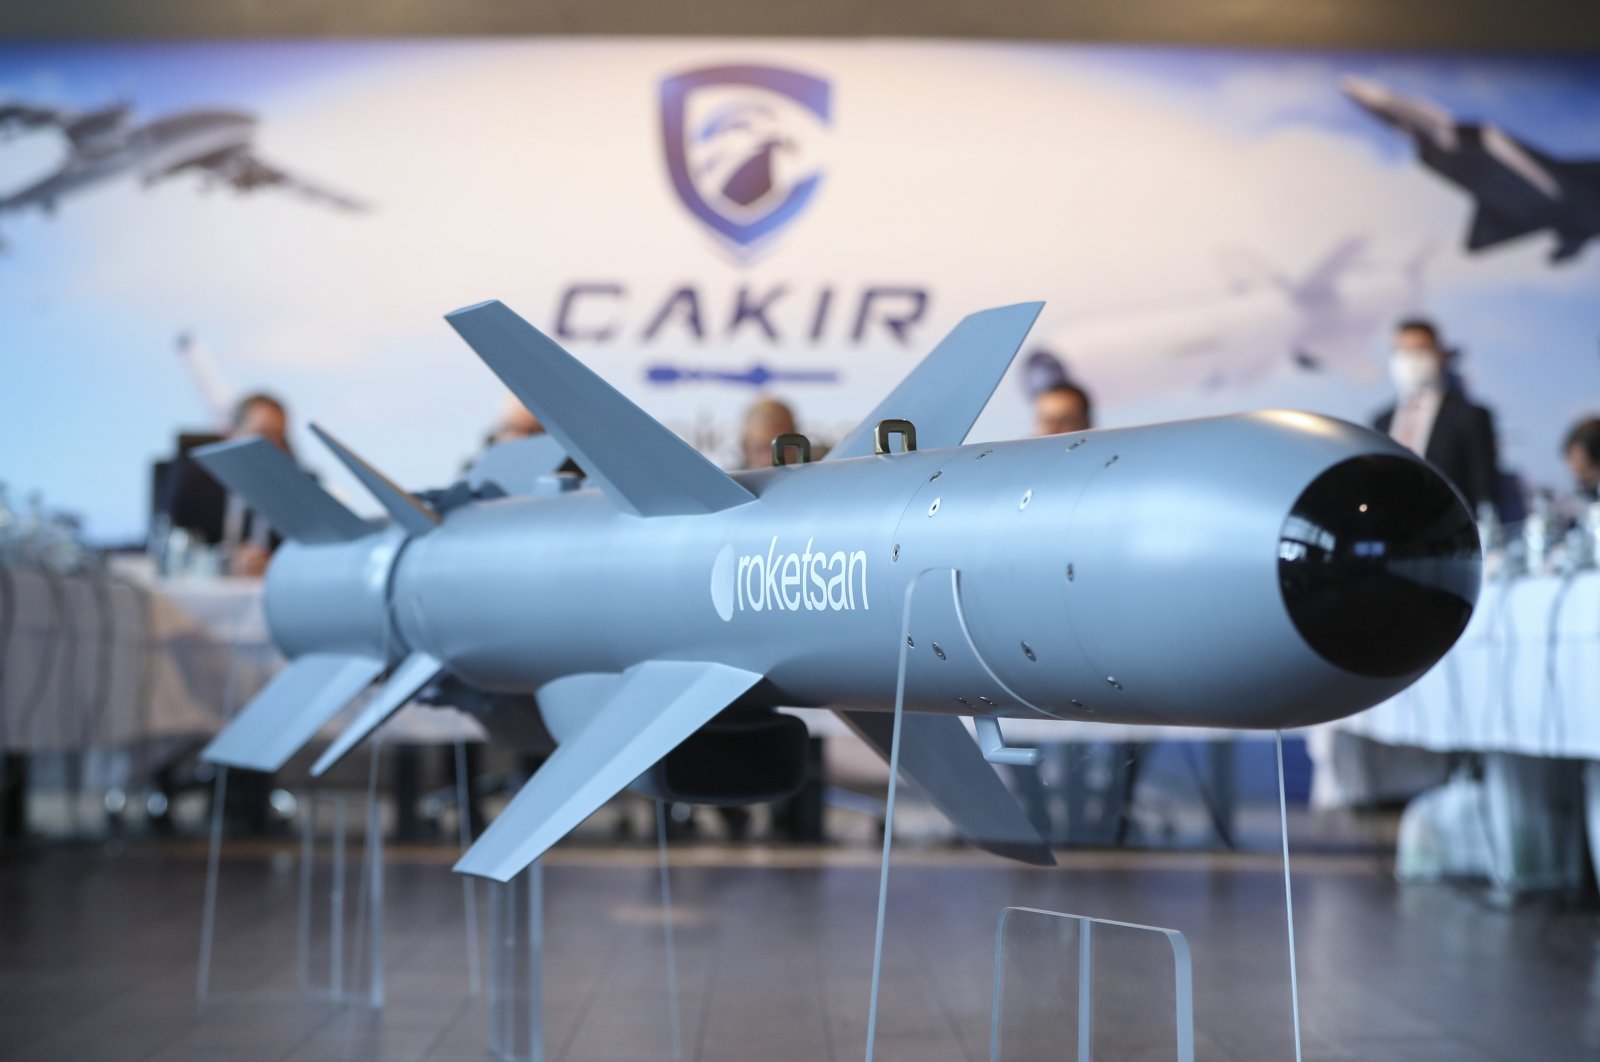 The Çakır new generation cruise missile developed by Roketsan is seen during an event in the capital Ankara, Turkey, March 31, 2022. (AA Photo)